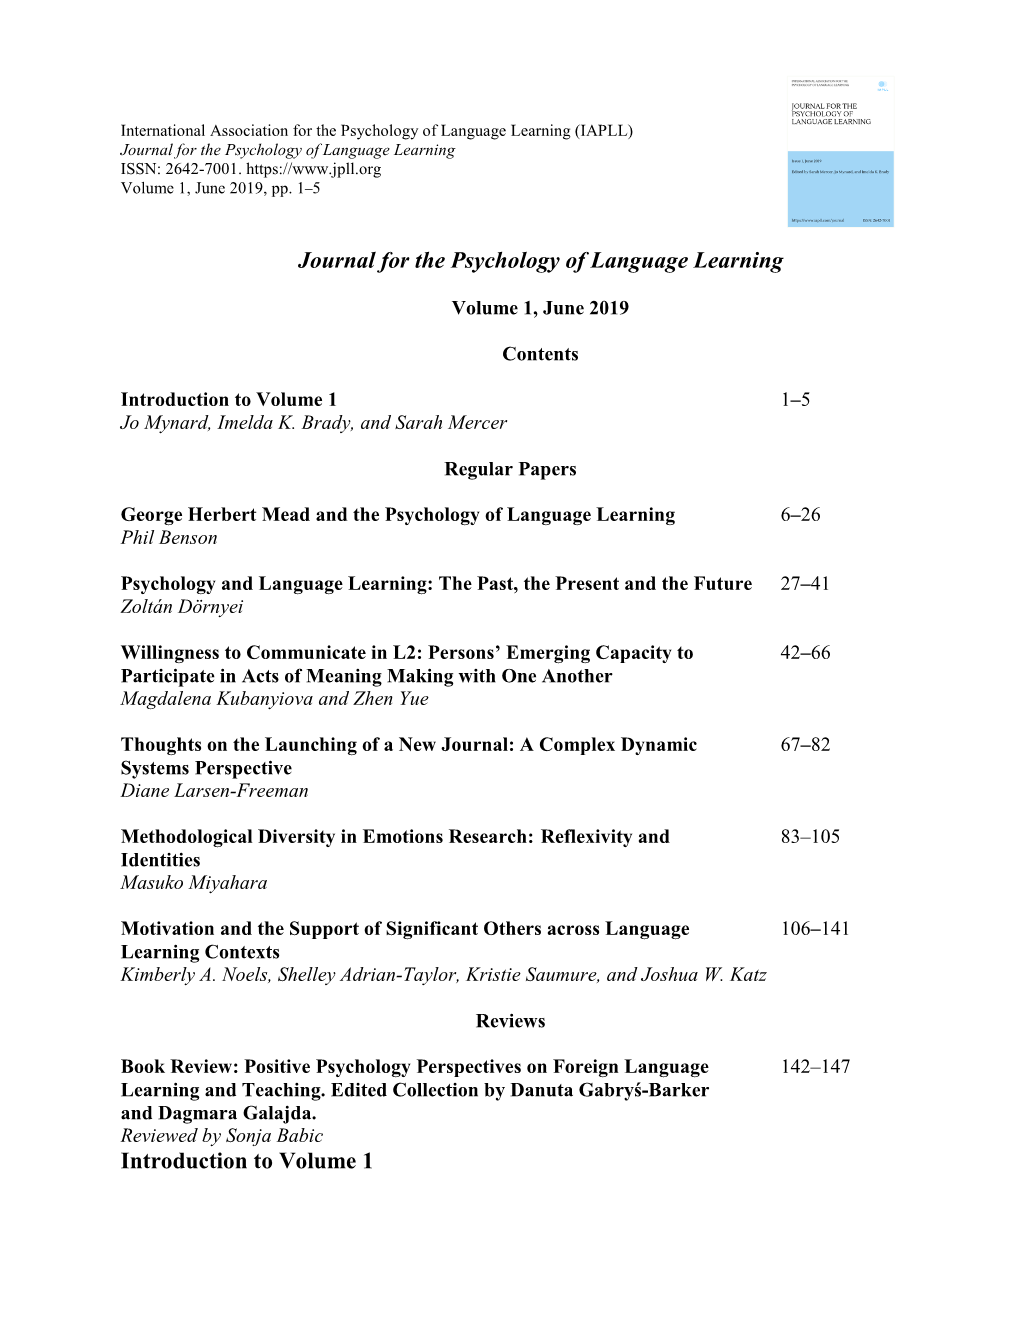 Journal for the Psychology of Language Learning Introduction to Volume 1